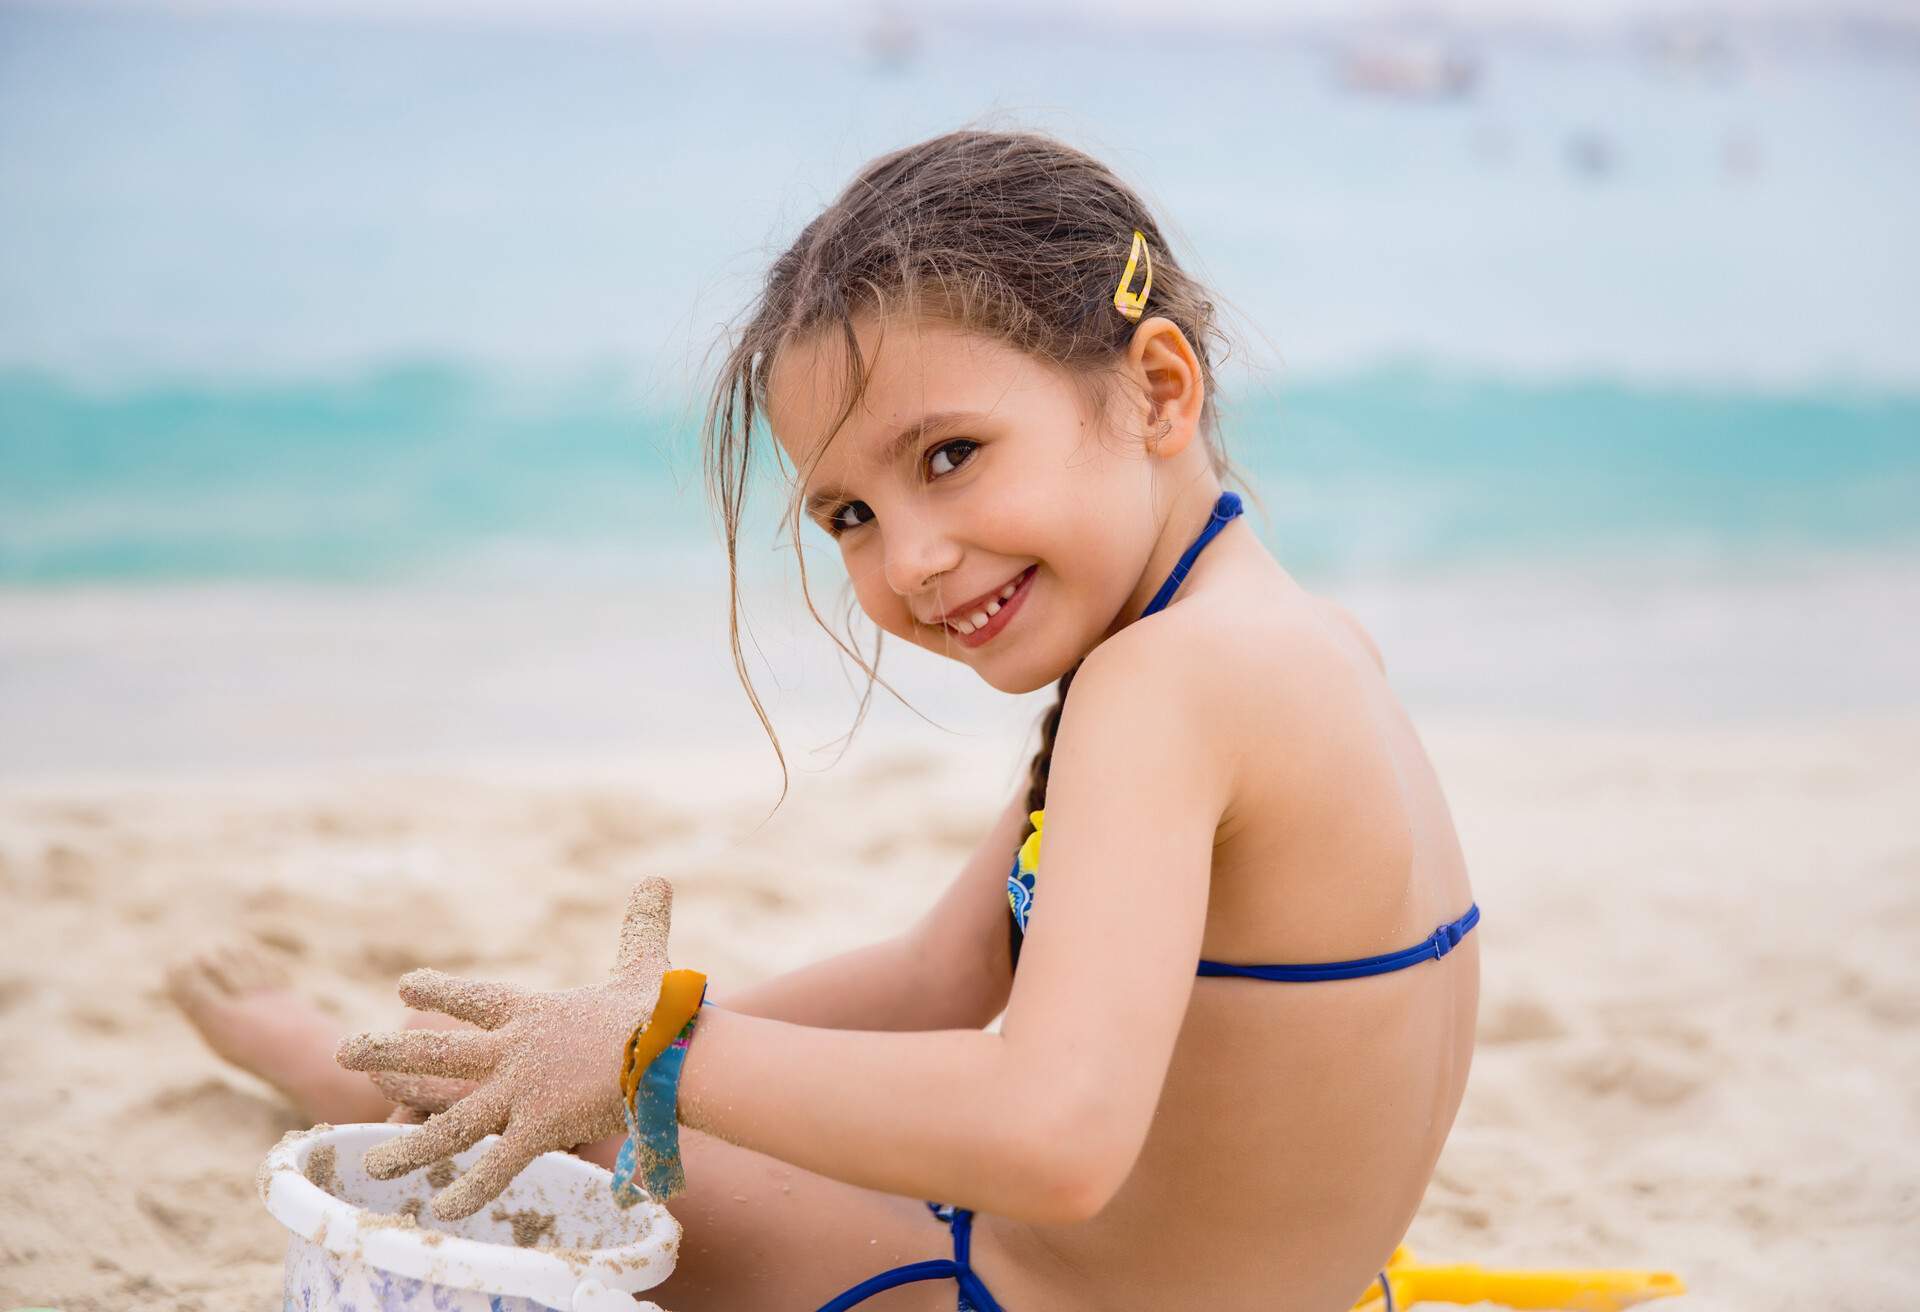 THEME_PEOPLE_GIRL_SAND_BEACH_PLAYING_GettyImages-682639288